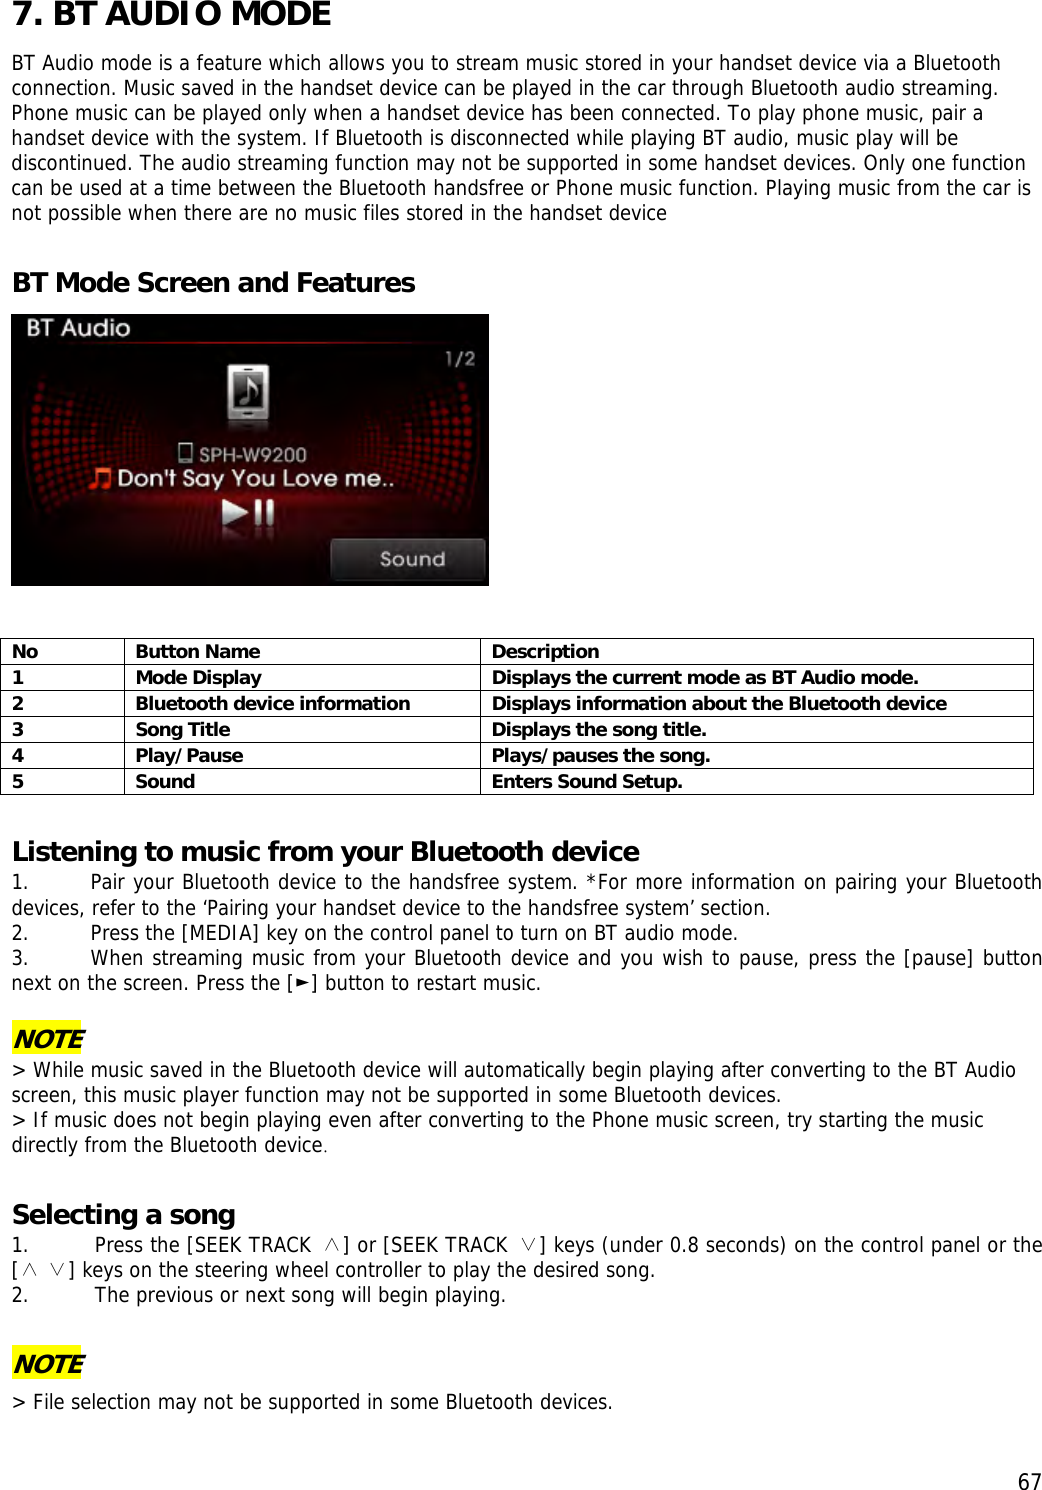  677. BT AUDIO MODE BT Audio mode is a feature which allows you to stream music stored in your handset device via a Bluetooth connection. Music saved in the handset device can be played in the car through Bluetooth audio streaming. Phone music can be played only when a handset device has been connected. To play phone music, pair a handset device with the system. If Bluetooth is disconnected while playing BT audio, music play will be discontinued. The audio streaming function may not be supported in some handset devices. Only one function can be used at a time between the Bluetooth handsfree or Phone music function. Playing music from the car is not possible when there are no music files stored in the handset device   BT Mode Screen and Features   No Button Name  Description 1  Mode Display  Displays the current mode as BT Audio mode. 2  Bluetooth device information  Displays information about the Bluetooth device 3  Song Title  Displays the song title. 4  Play/Pause   Plays/pauses the song. 5  Sound  Enters Sound Setup.  Listening to music from your Bluetooth device 1. Pair your Bluetooth device to the handsfree system. *For more information on pairing your Bluetooth devices, refer to the ‘Pairing your handset device to the handsfree system’ section.  2. Press the [MEDIA] key on the control panel to turn on BT audio mode. 3. When streaming music from your Bluetooth device and you wish to pause, press the [pause] button next on the screen. Press the [►] button to restart music.  NOTE &gt; While music saved in the Bluetooth device will automatically begin playing after converting to the BT Audio screen, this music player function may not be supported in some Bluetooth devices. &gt; If music does not begin playing even after converting to the Phone music screen, try starting the music directly from the Bluetooth device.  Selecting a song 1. Press the [SEEK TRACK ∧] or [SEEK TRACK ∨] keys (under 0.8 seconds) on the control panel or the [   ] keys on the steering wh∧∨ eel controller to play the desired song.  2. The previous or next song will begin playing.  NOTE &gt; File selection may not be supported in some Bluetooth devices. 